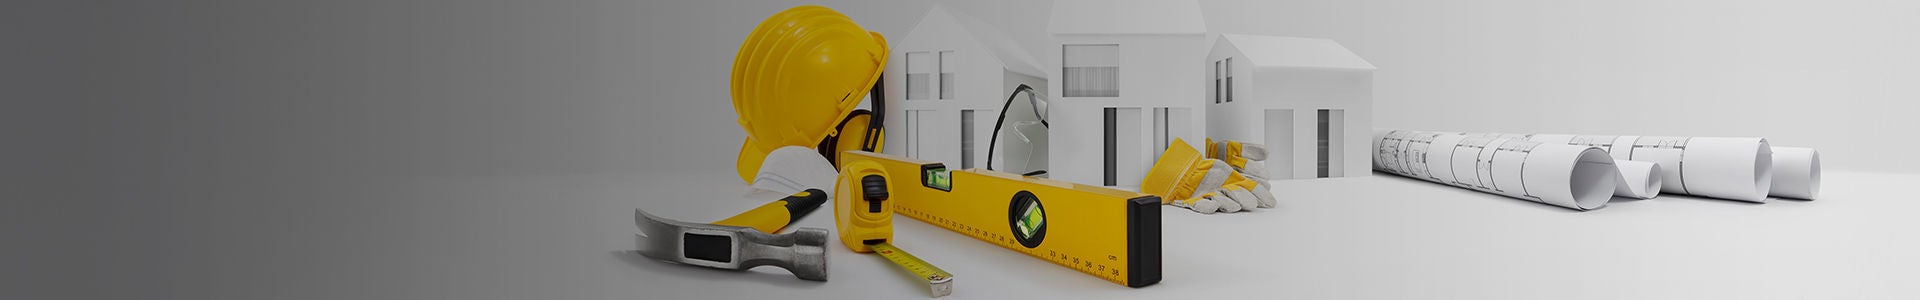 Contractor Tools with House Models